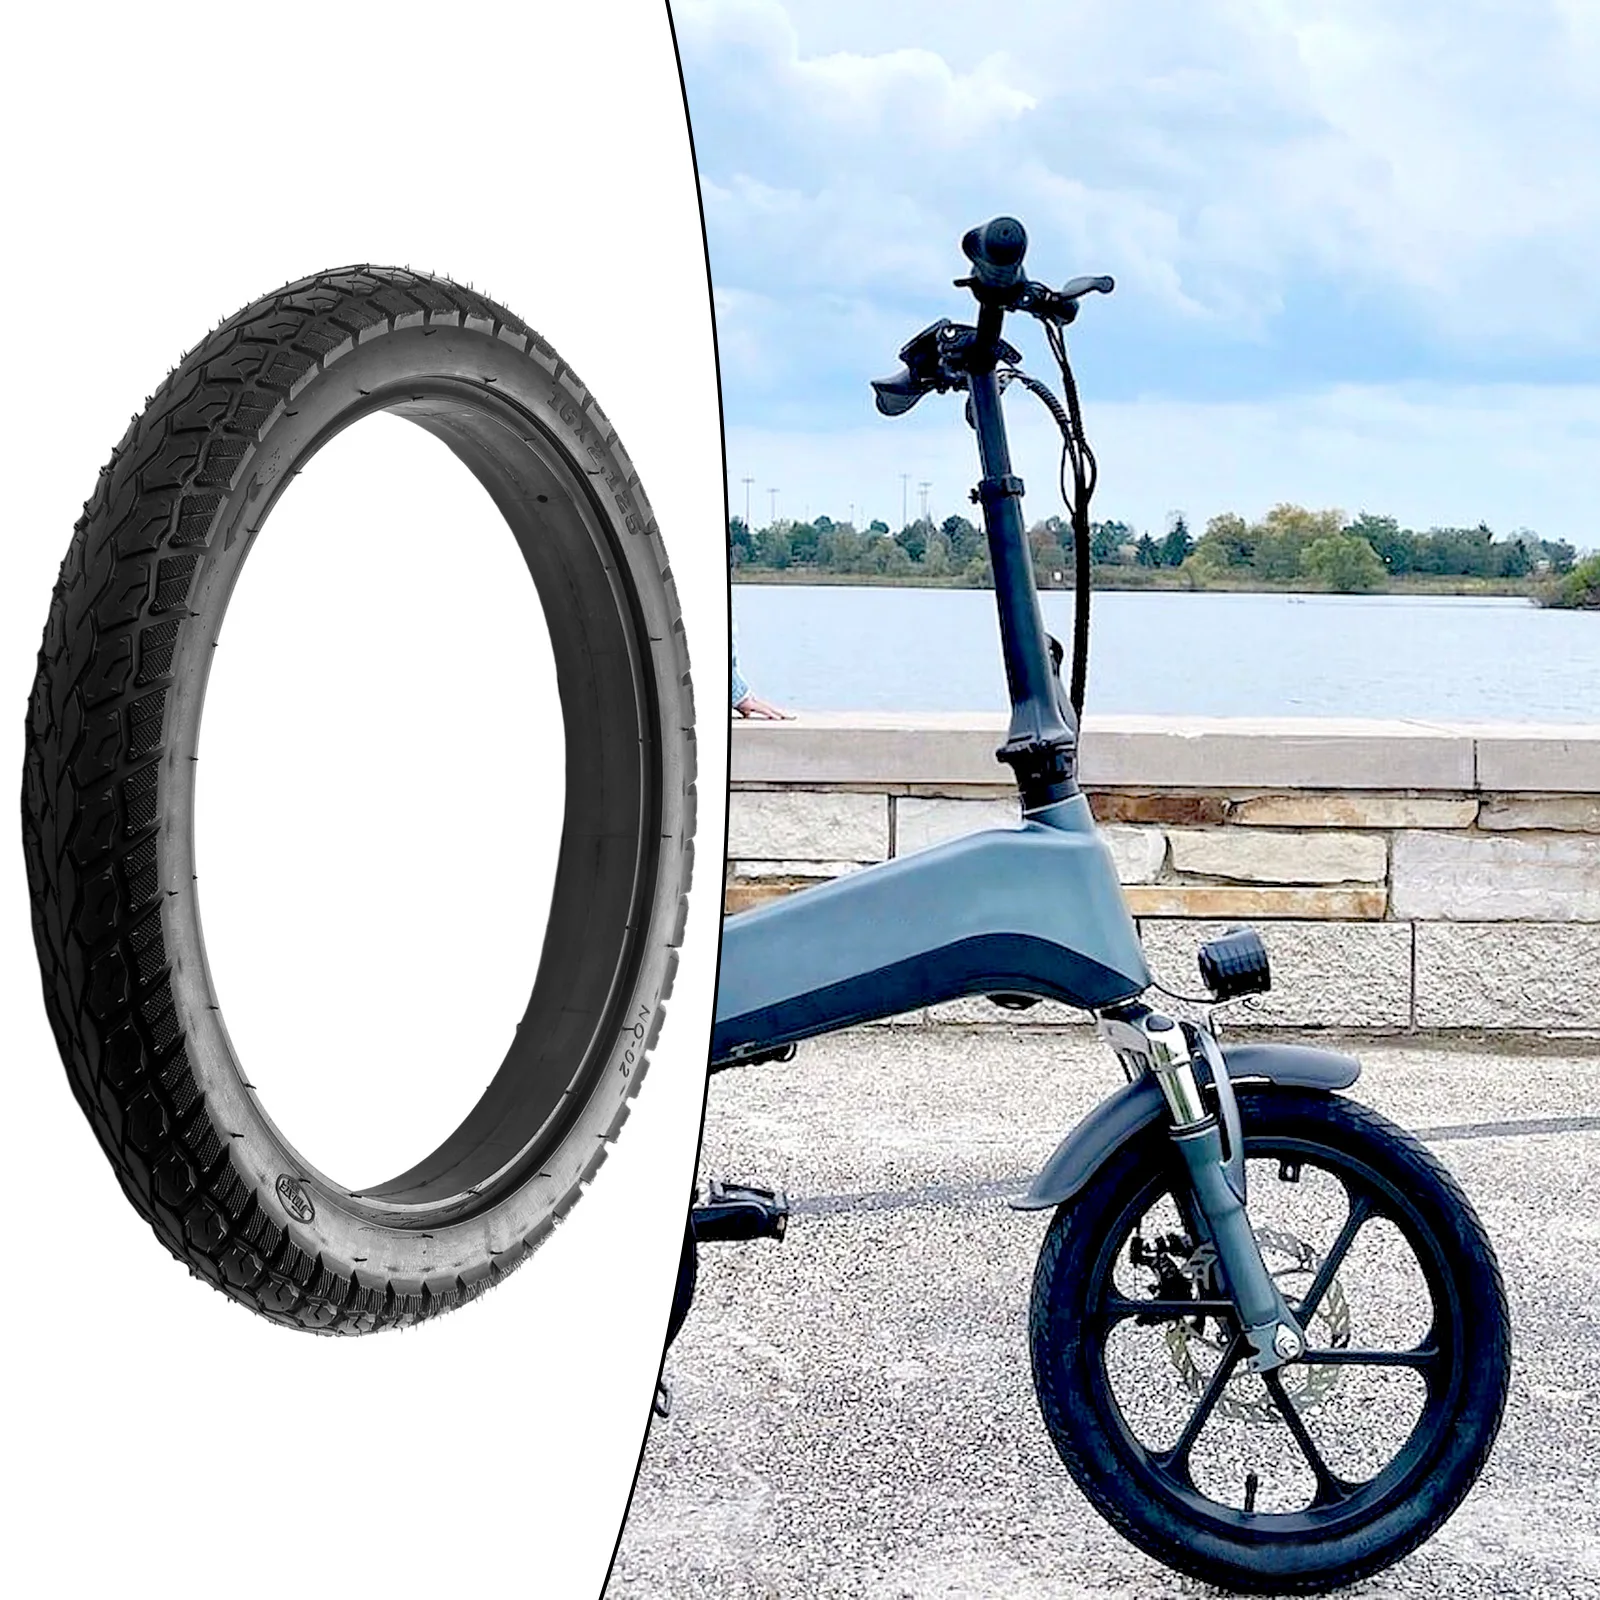 high-quality-tire-rubber-16-2125-57-305-inflatable-tire-solid-tire-bicycle-black-for-e-bikes-for-electric-bike